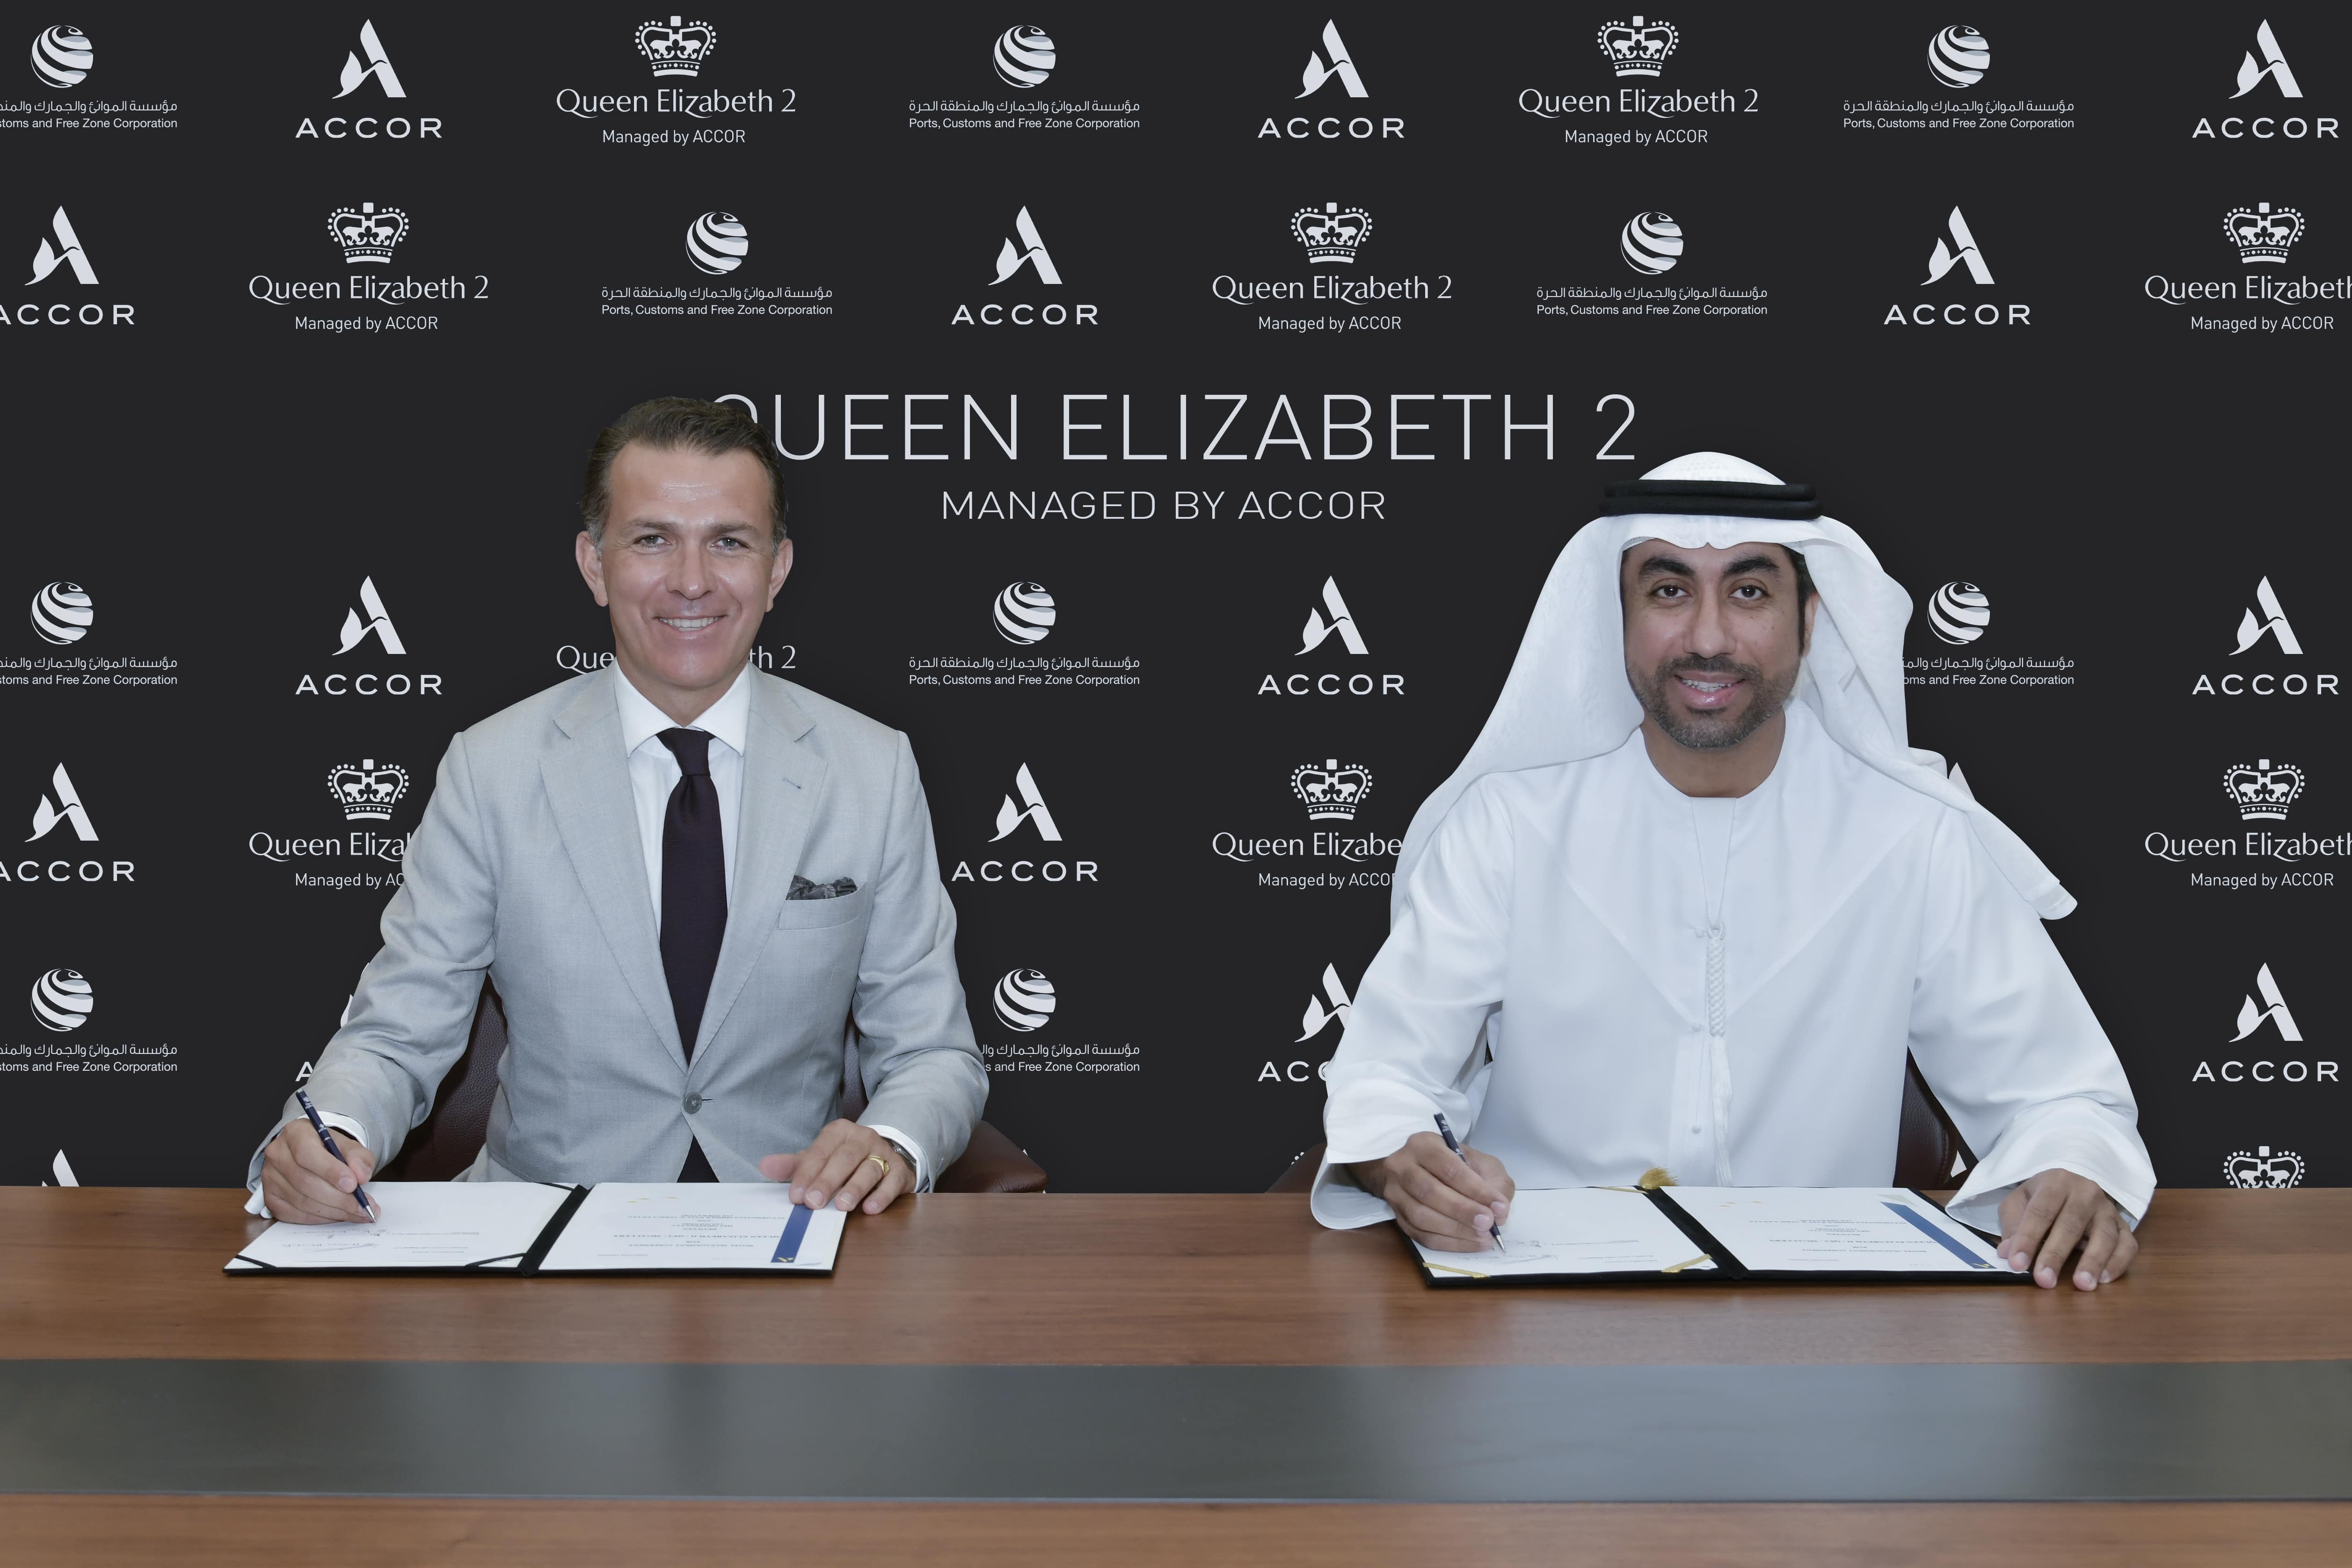 PCFC signs an agreement with Accor Group to manage Queen Elizabeth 2 Hotel